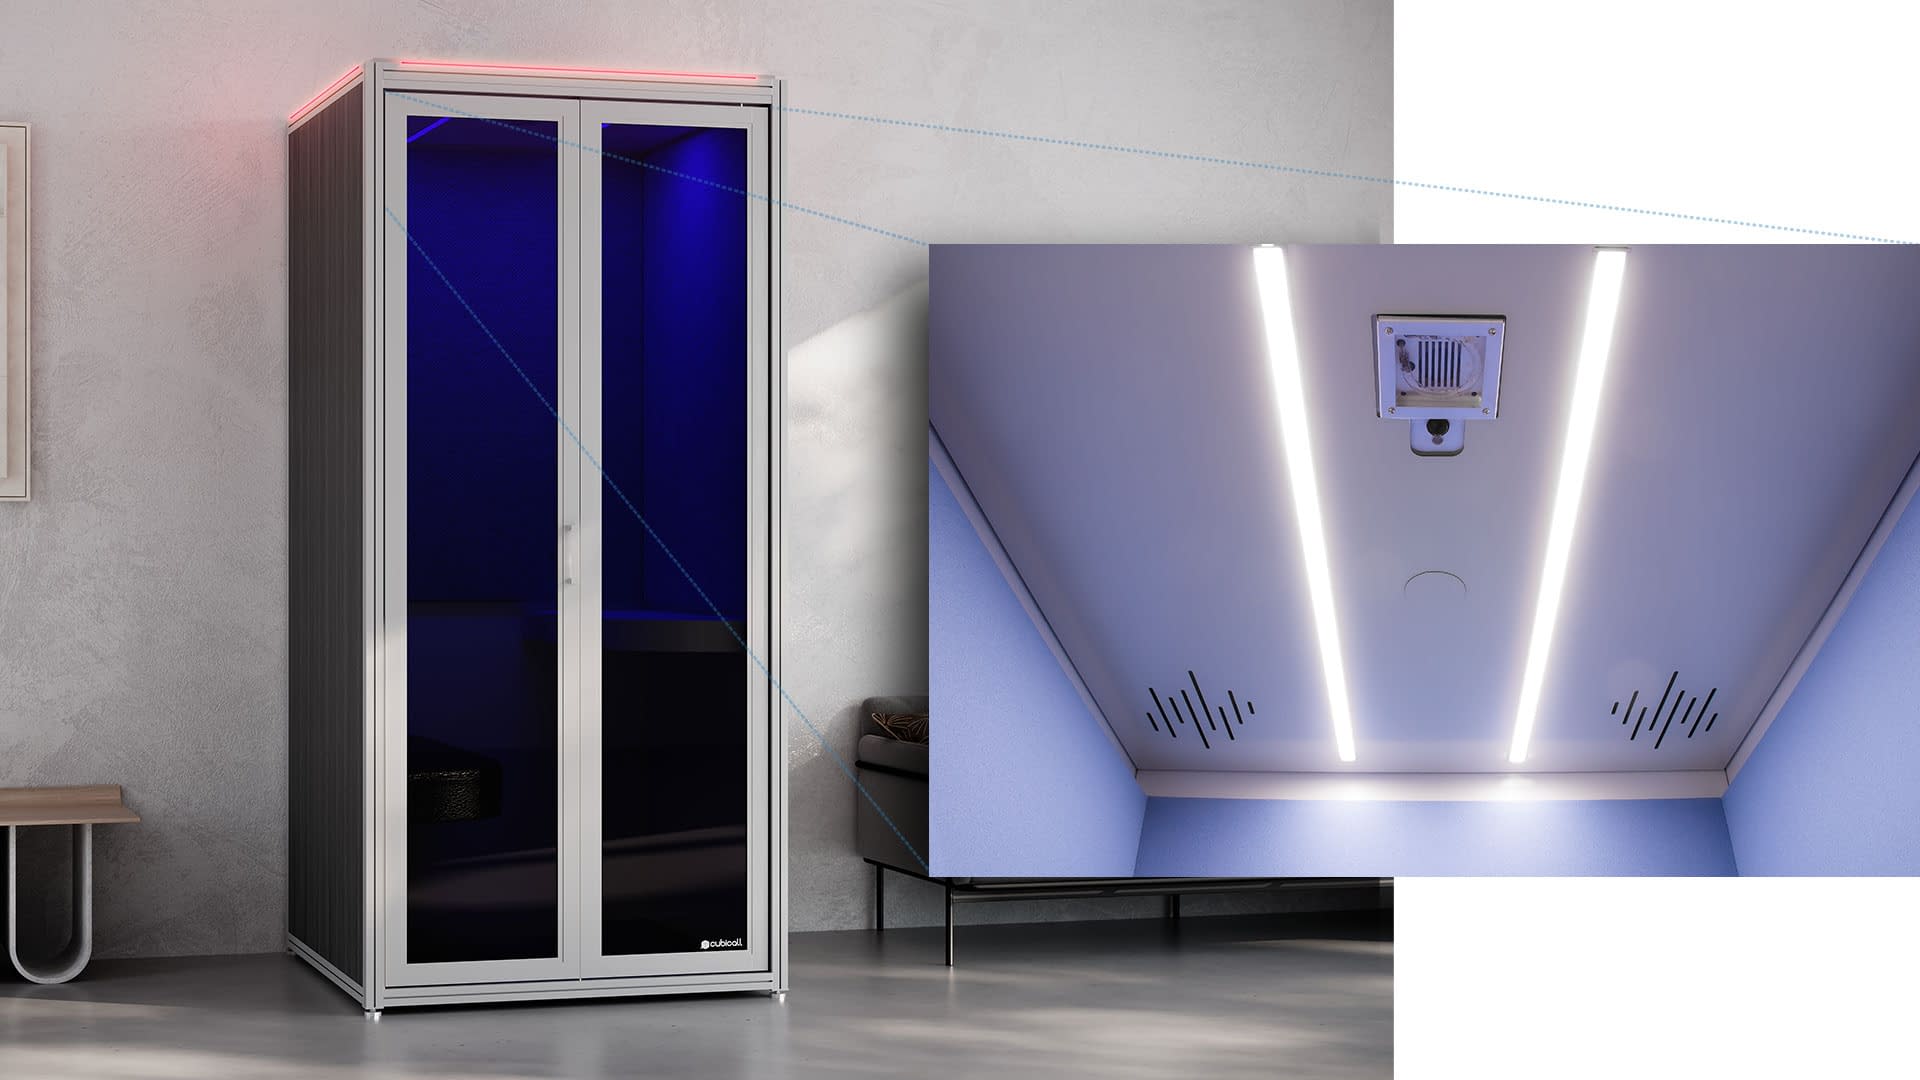 UV Phone Booth for After-use Disinfection Features